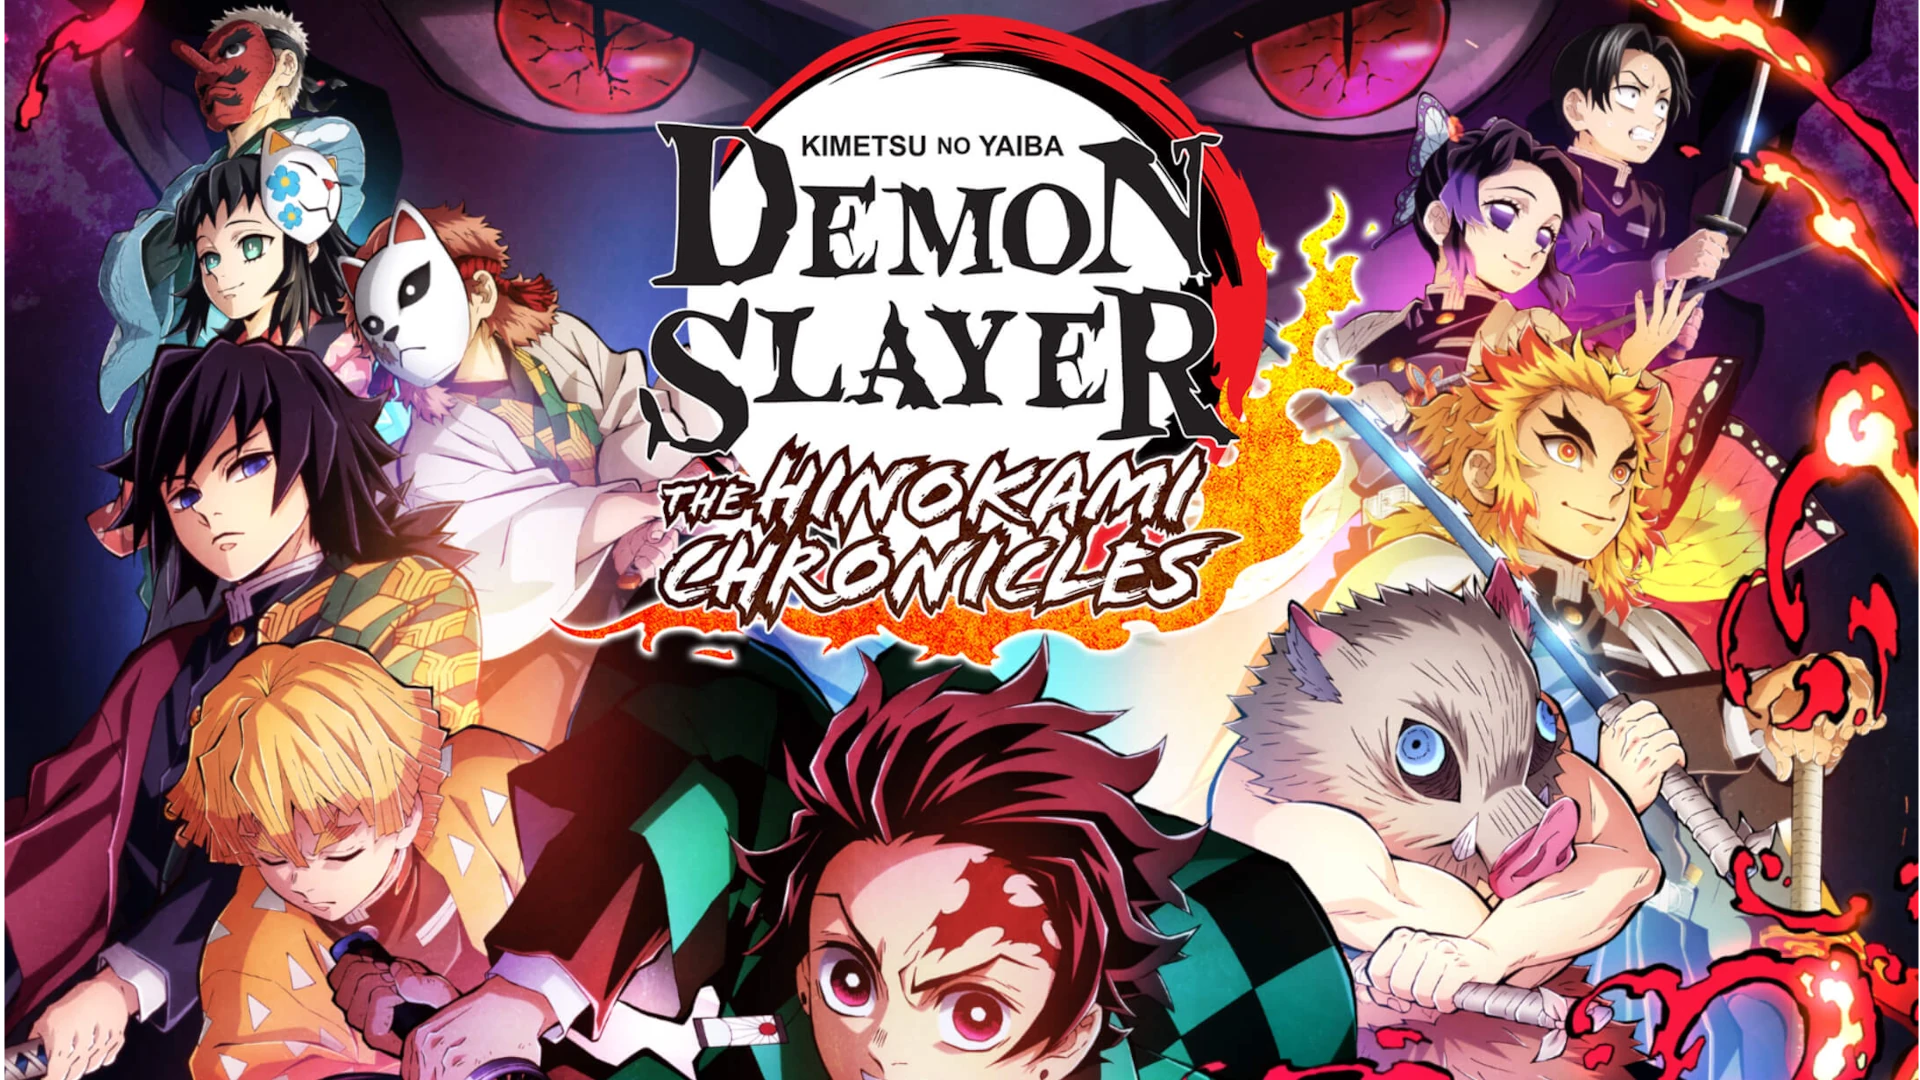 Demon Slayer season 4: release date, trailer, and everything we know so far